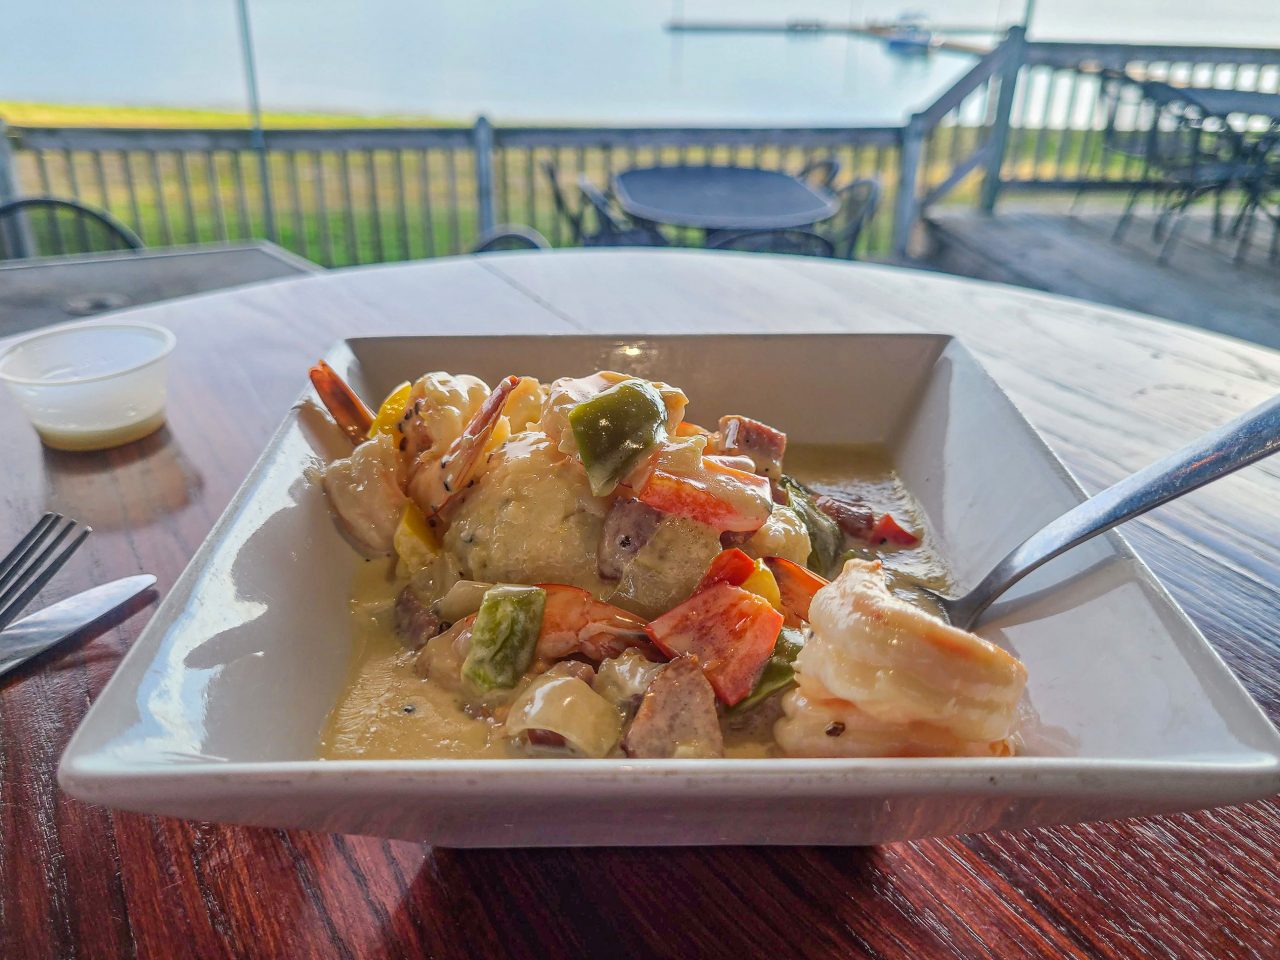 Shrimp and Grits at the Docks